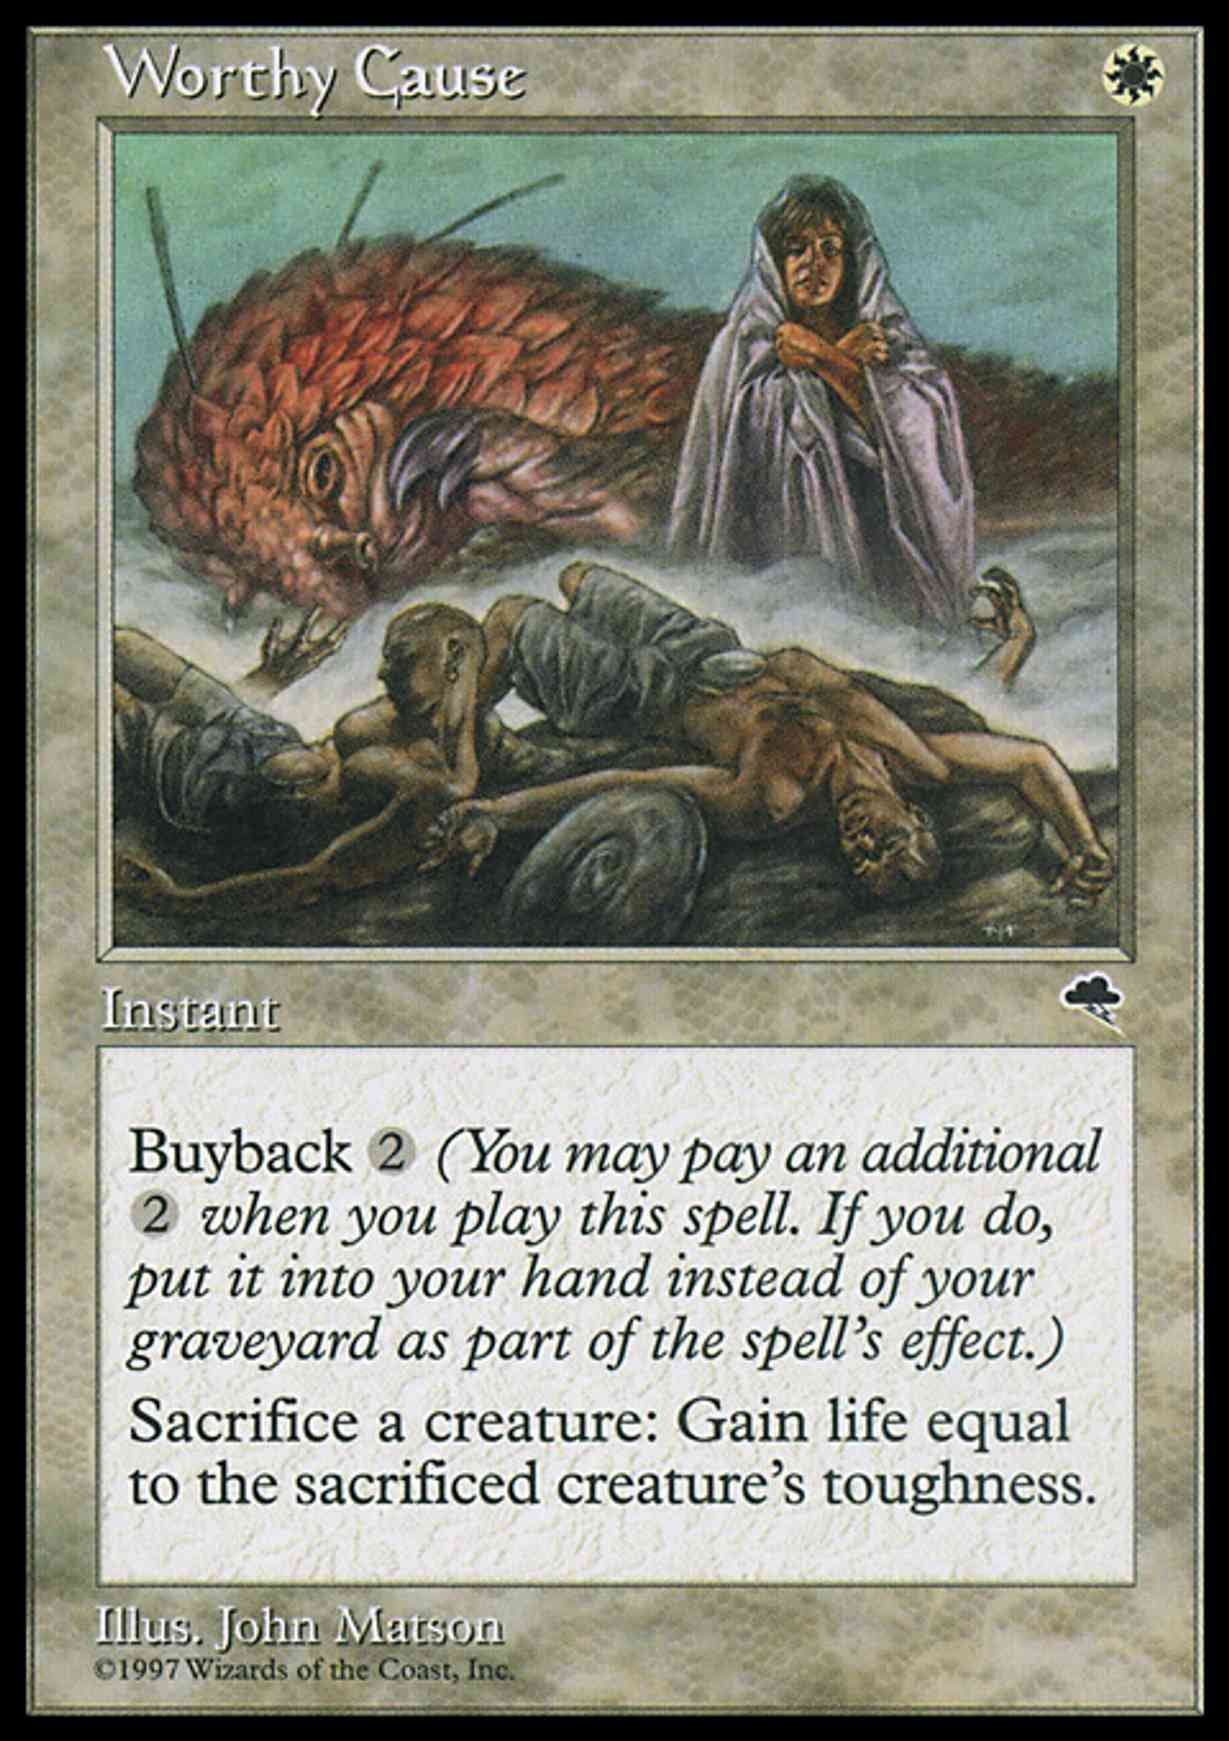 Worthy Cause magic card front